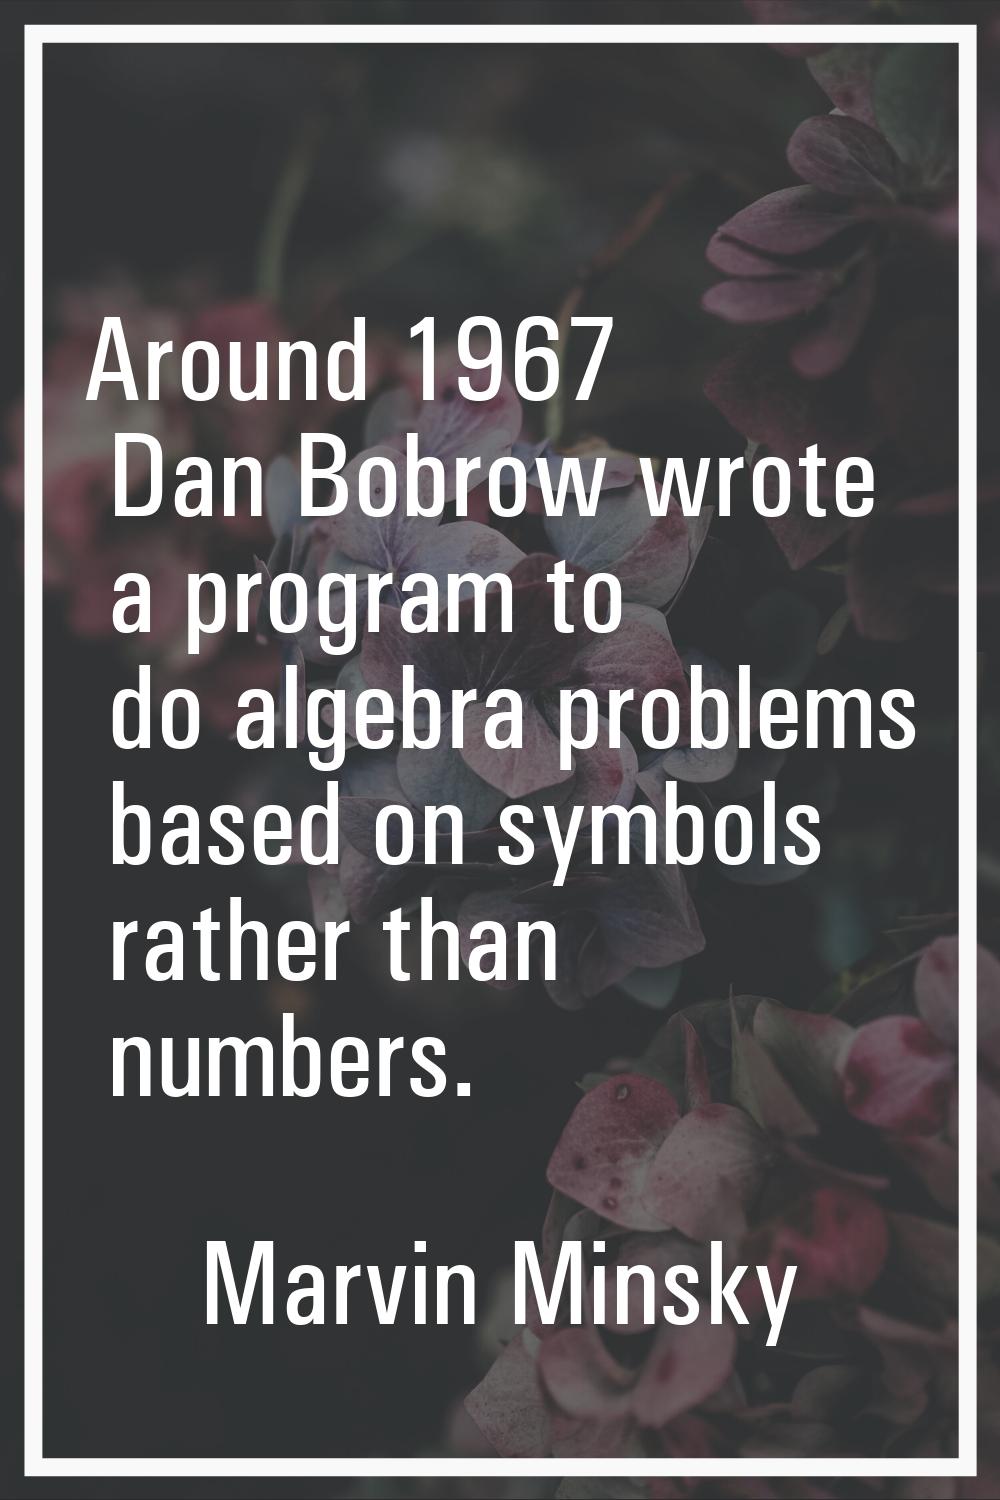 Around 1967 Dan Bobrow wrote a program to do algebra problems based on symbols rather than numbers.